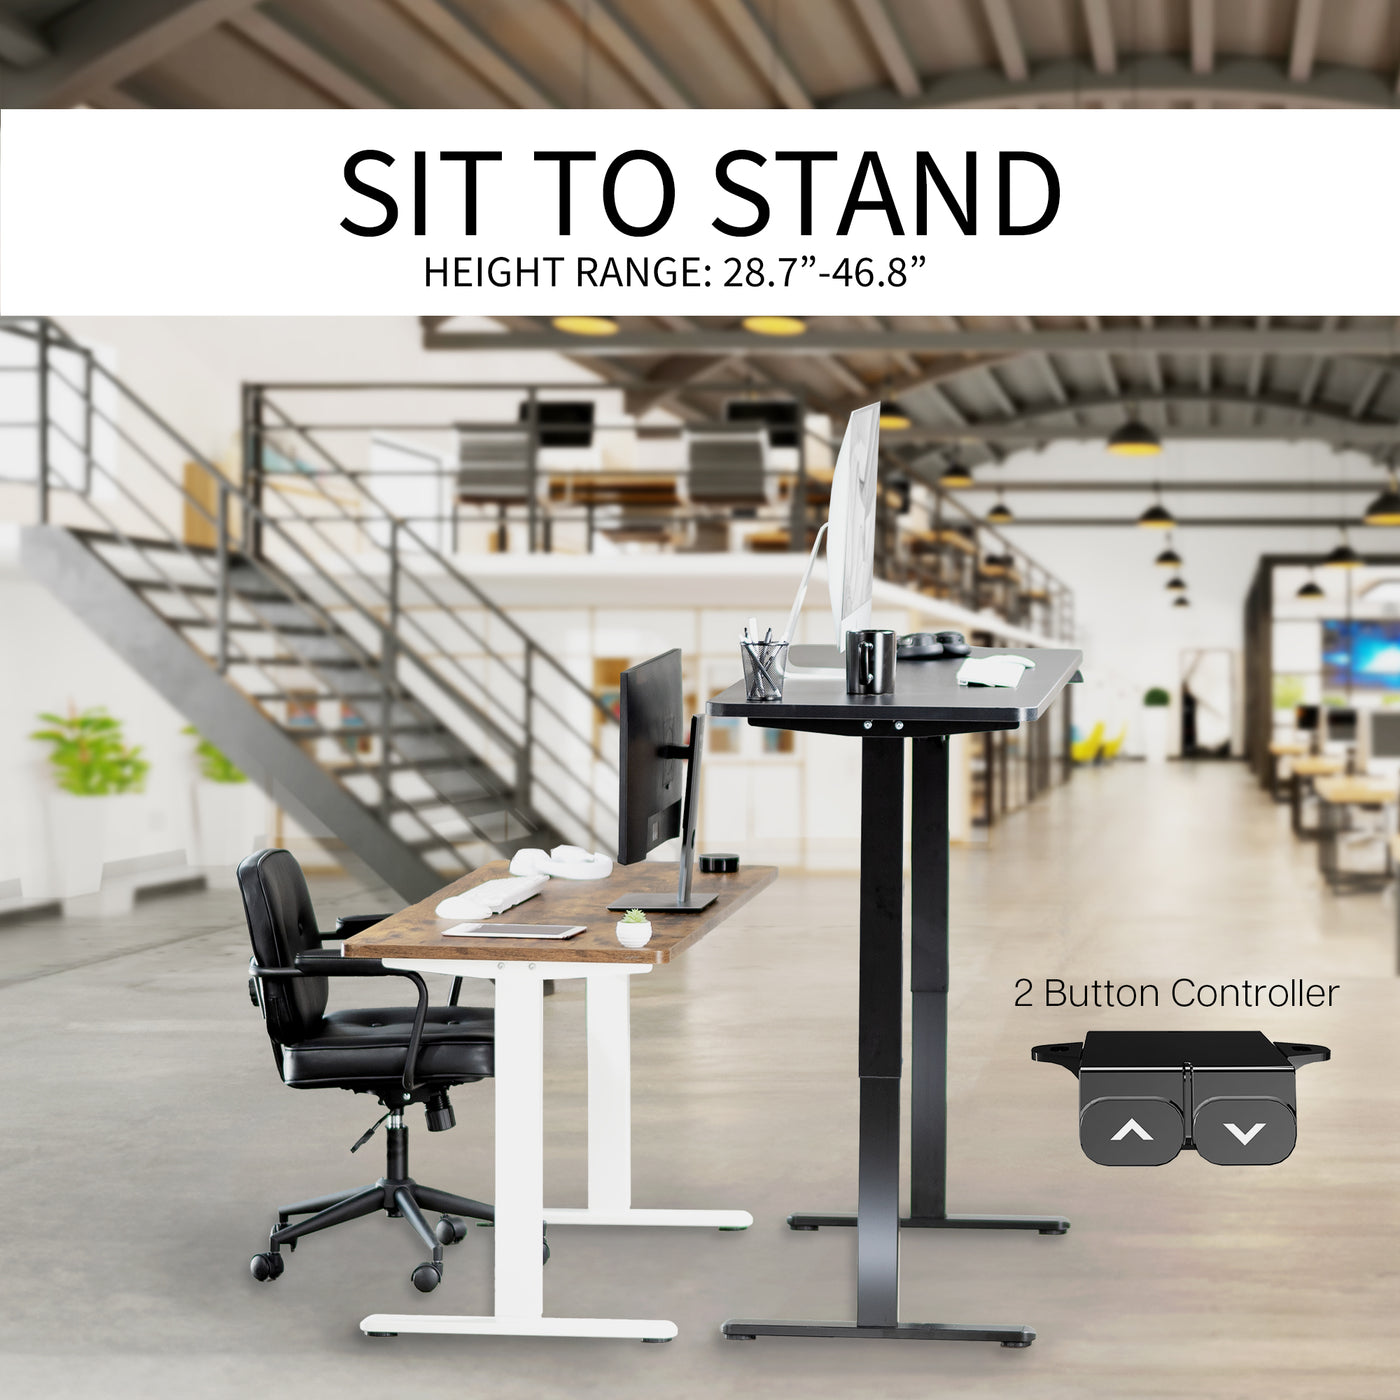 Heavy-duty electric height adjustable desktop workstation for active sit or stand efficient workspace with 2 button easy control panel.